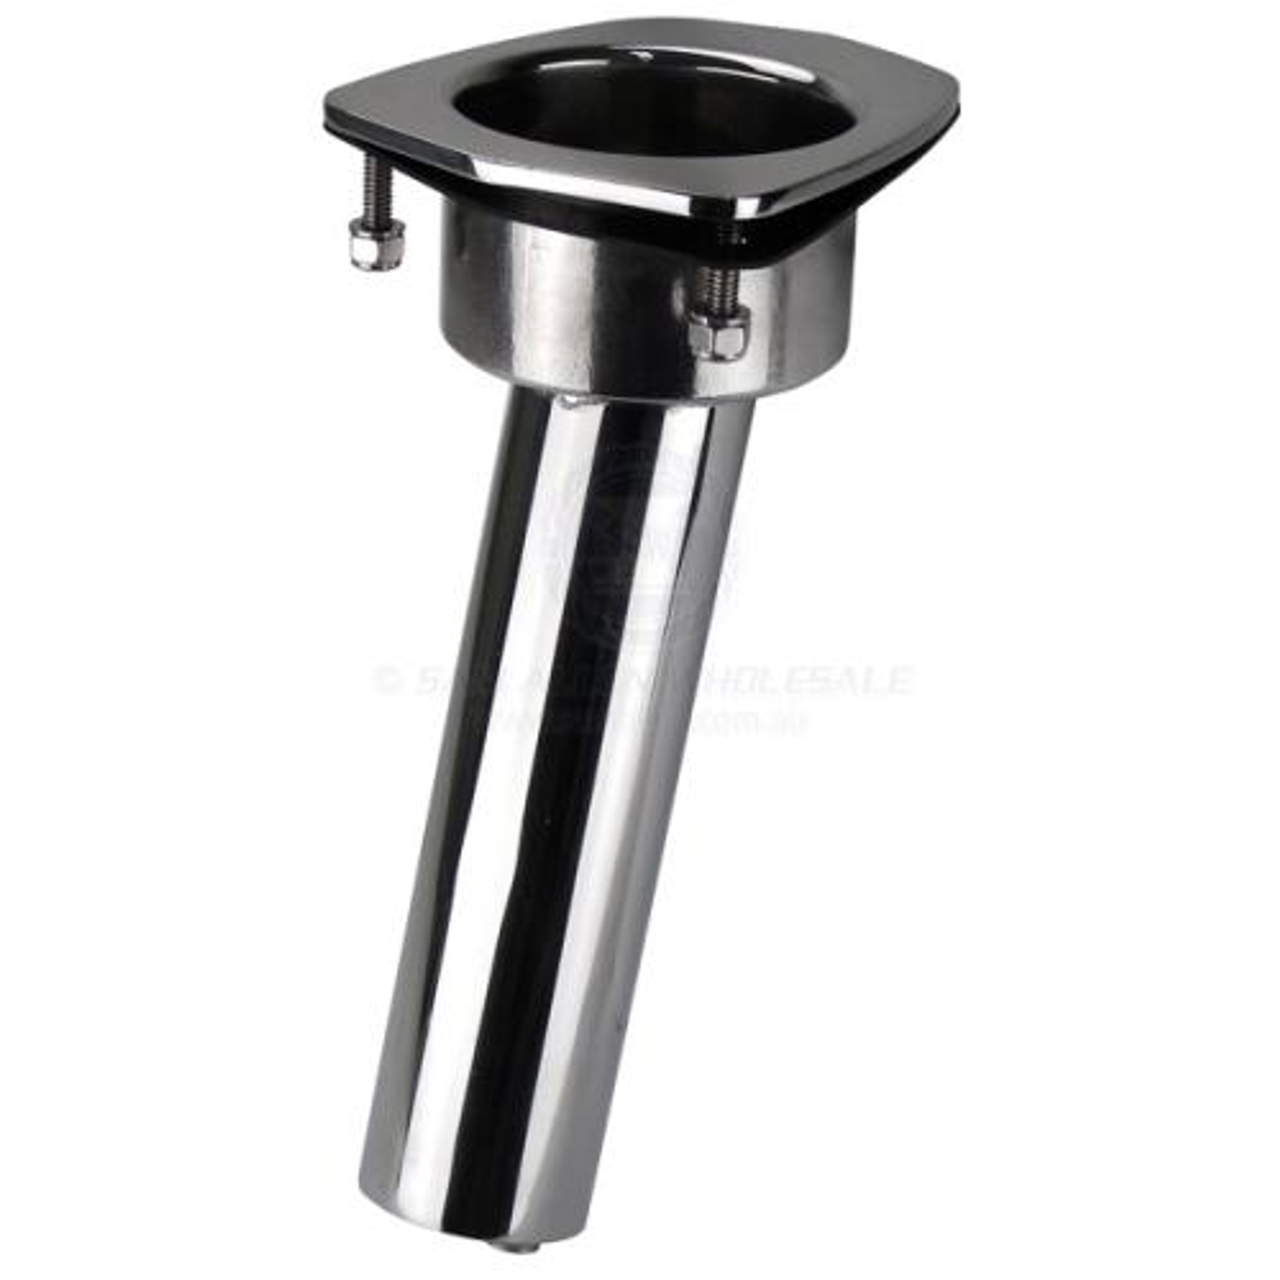 Relaxn Mako Series Stainless Steel Rod Holder with Cup - 15 Degree (49460  49460-BULK)